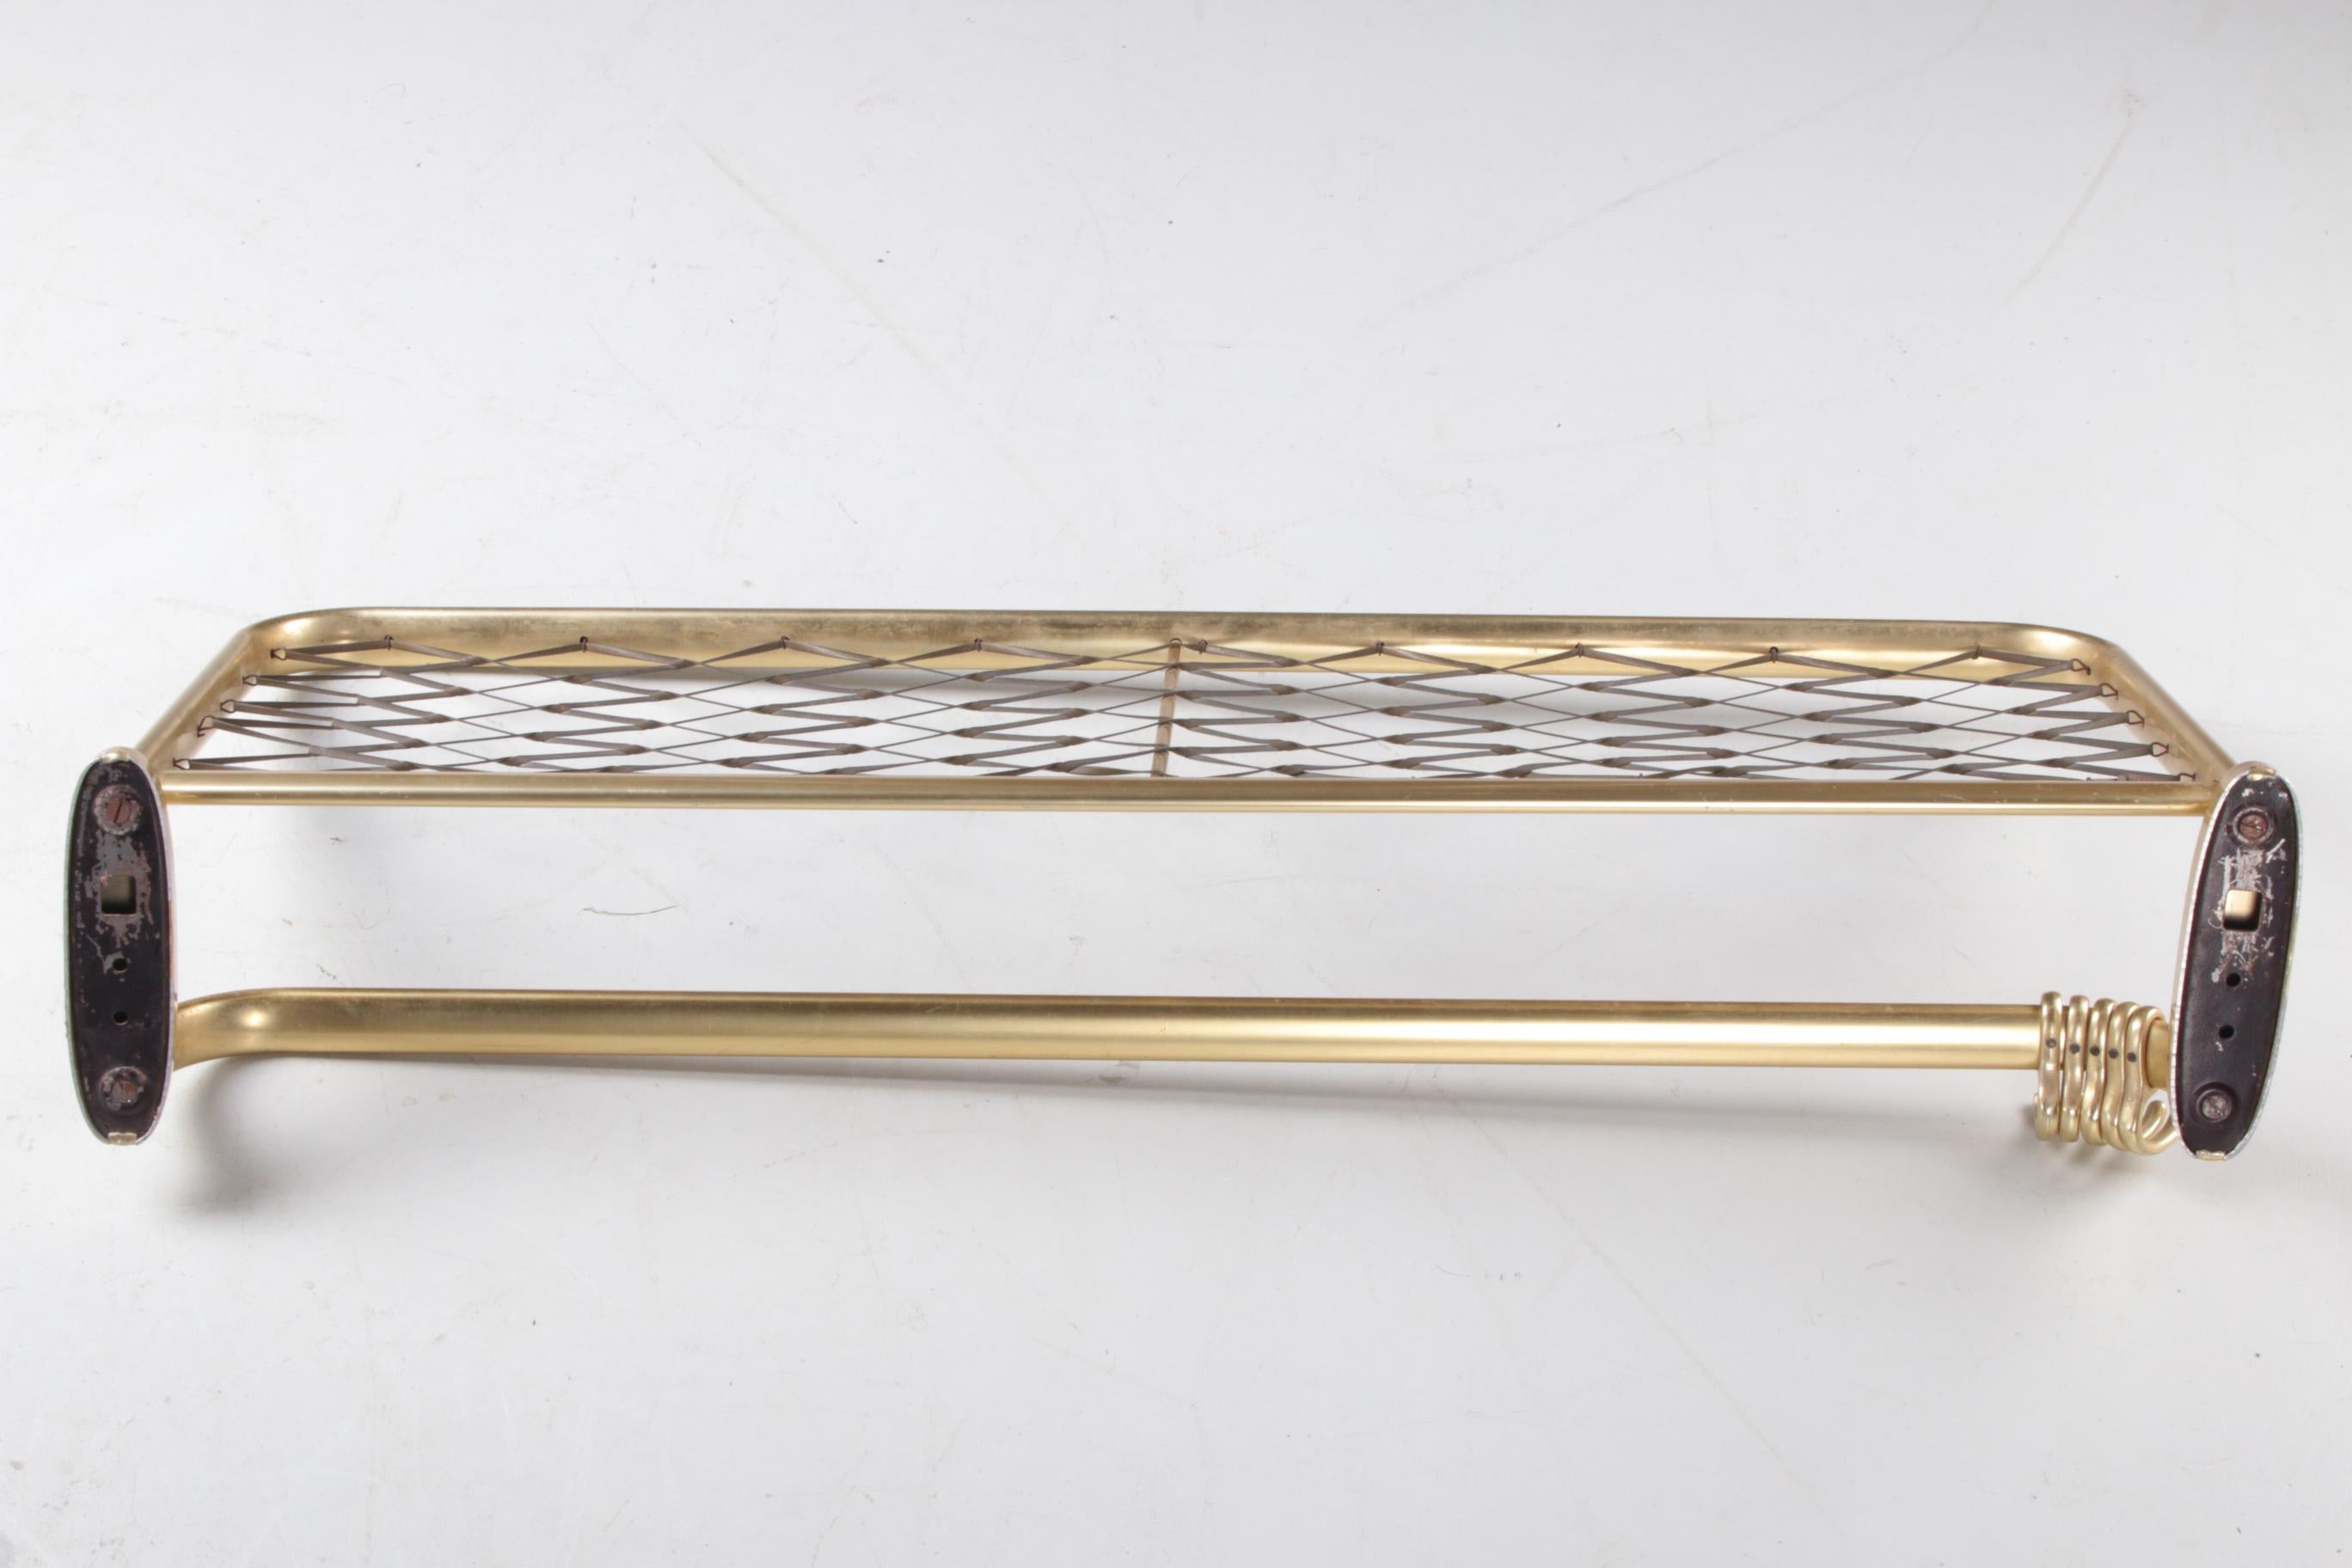 Wall coat rack Hollywood Regency style 1960s

Gold-coloured aluminum coat rack from Germany.

Probably made in the 1960s, now completely hip again.

Some discoloration in some places, which is not unusual over time.

This is a train model with nice